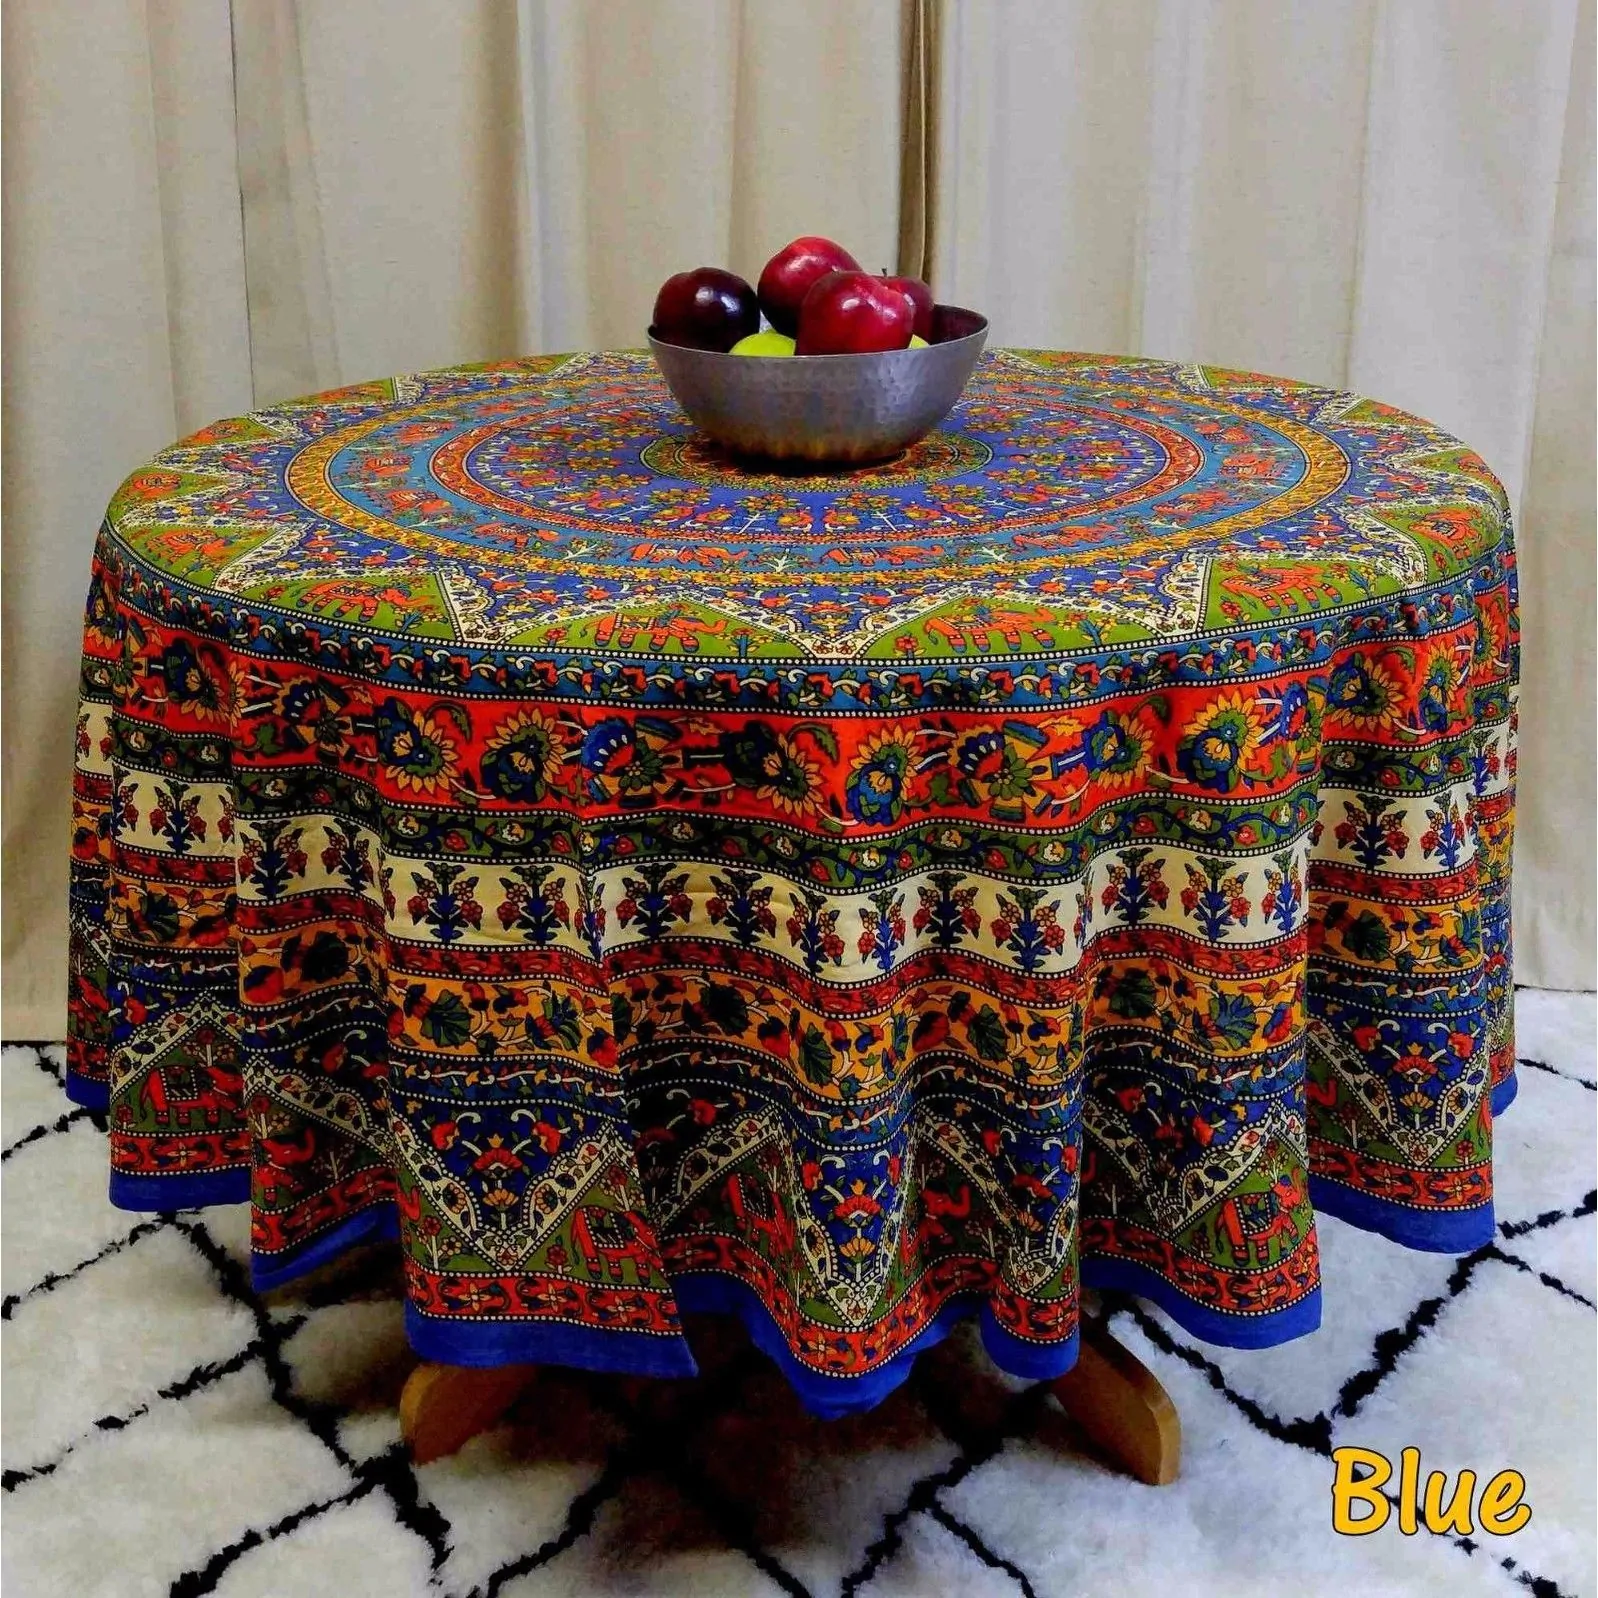 blue tablecloths our best table linens handmade mandala floral and elephant printed cotton tablecloth available red brown two sizes round small accent covers decor dining